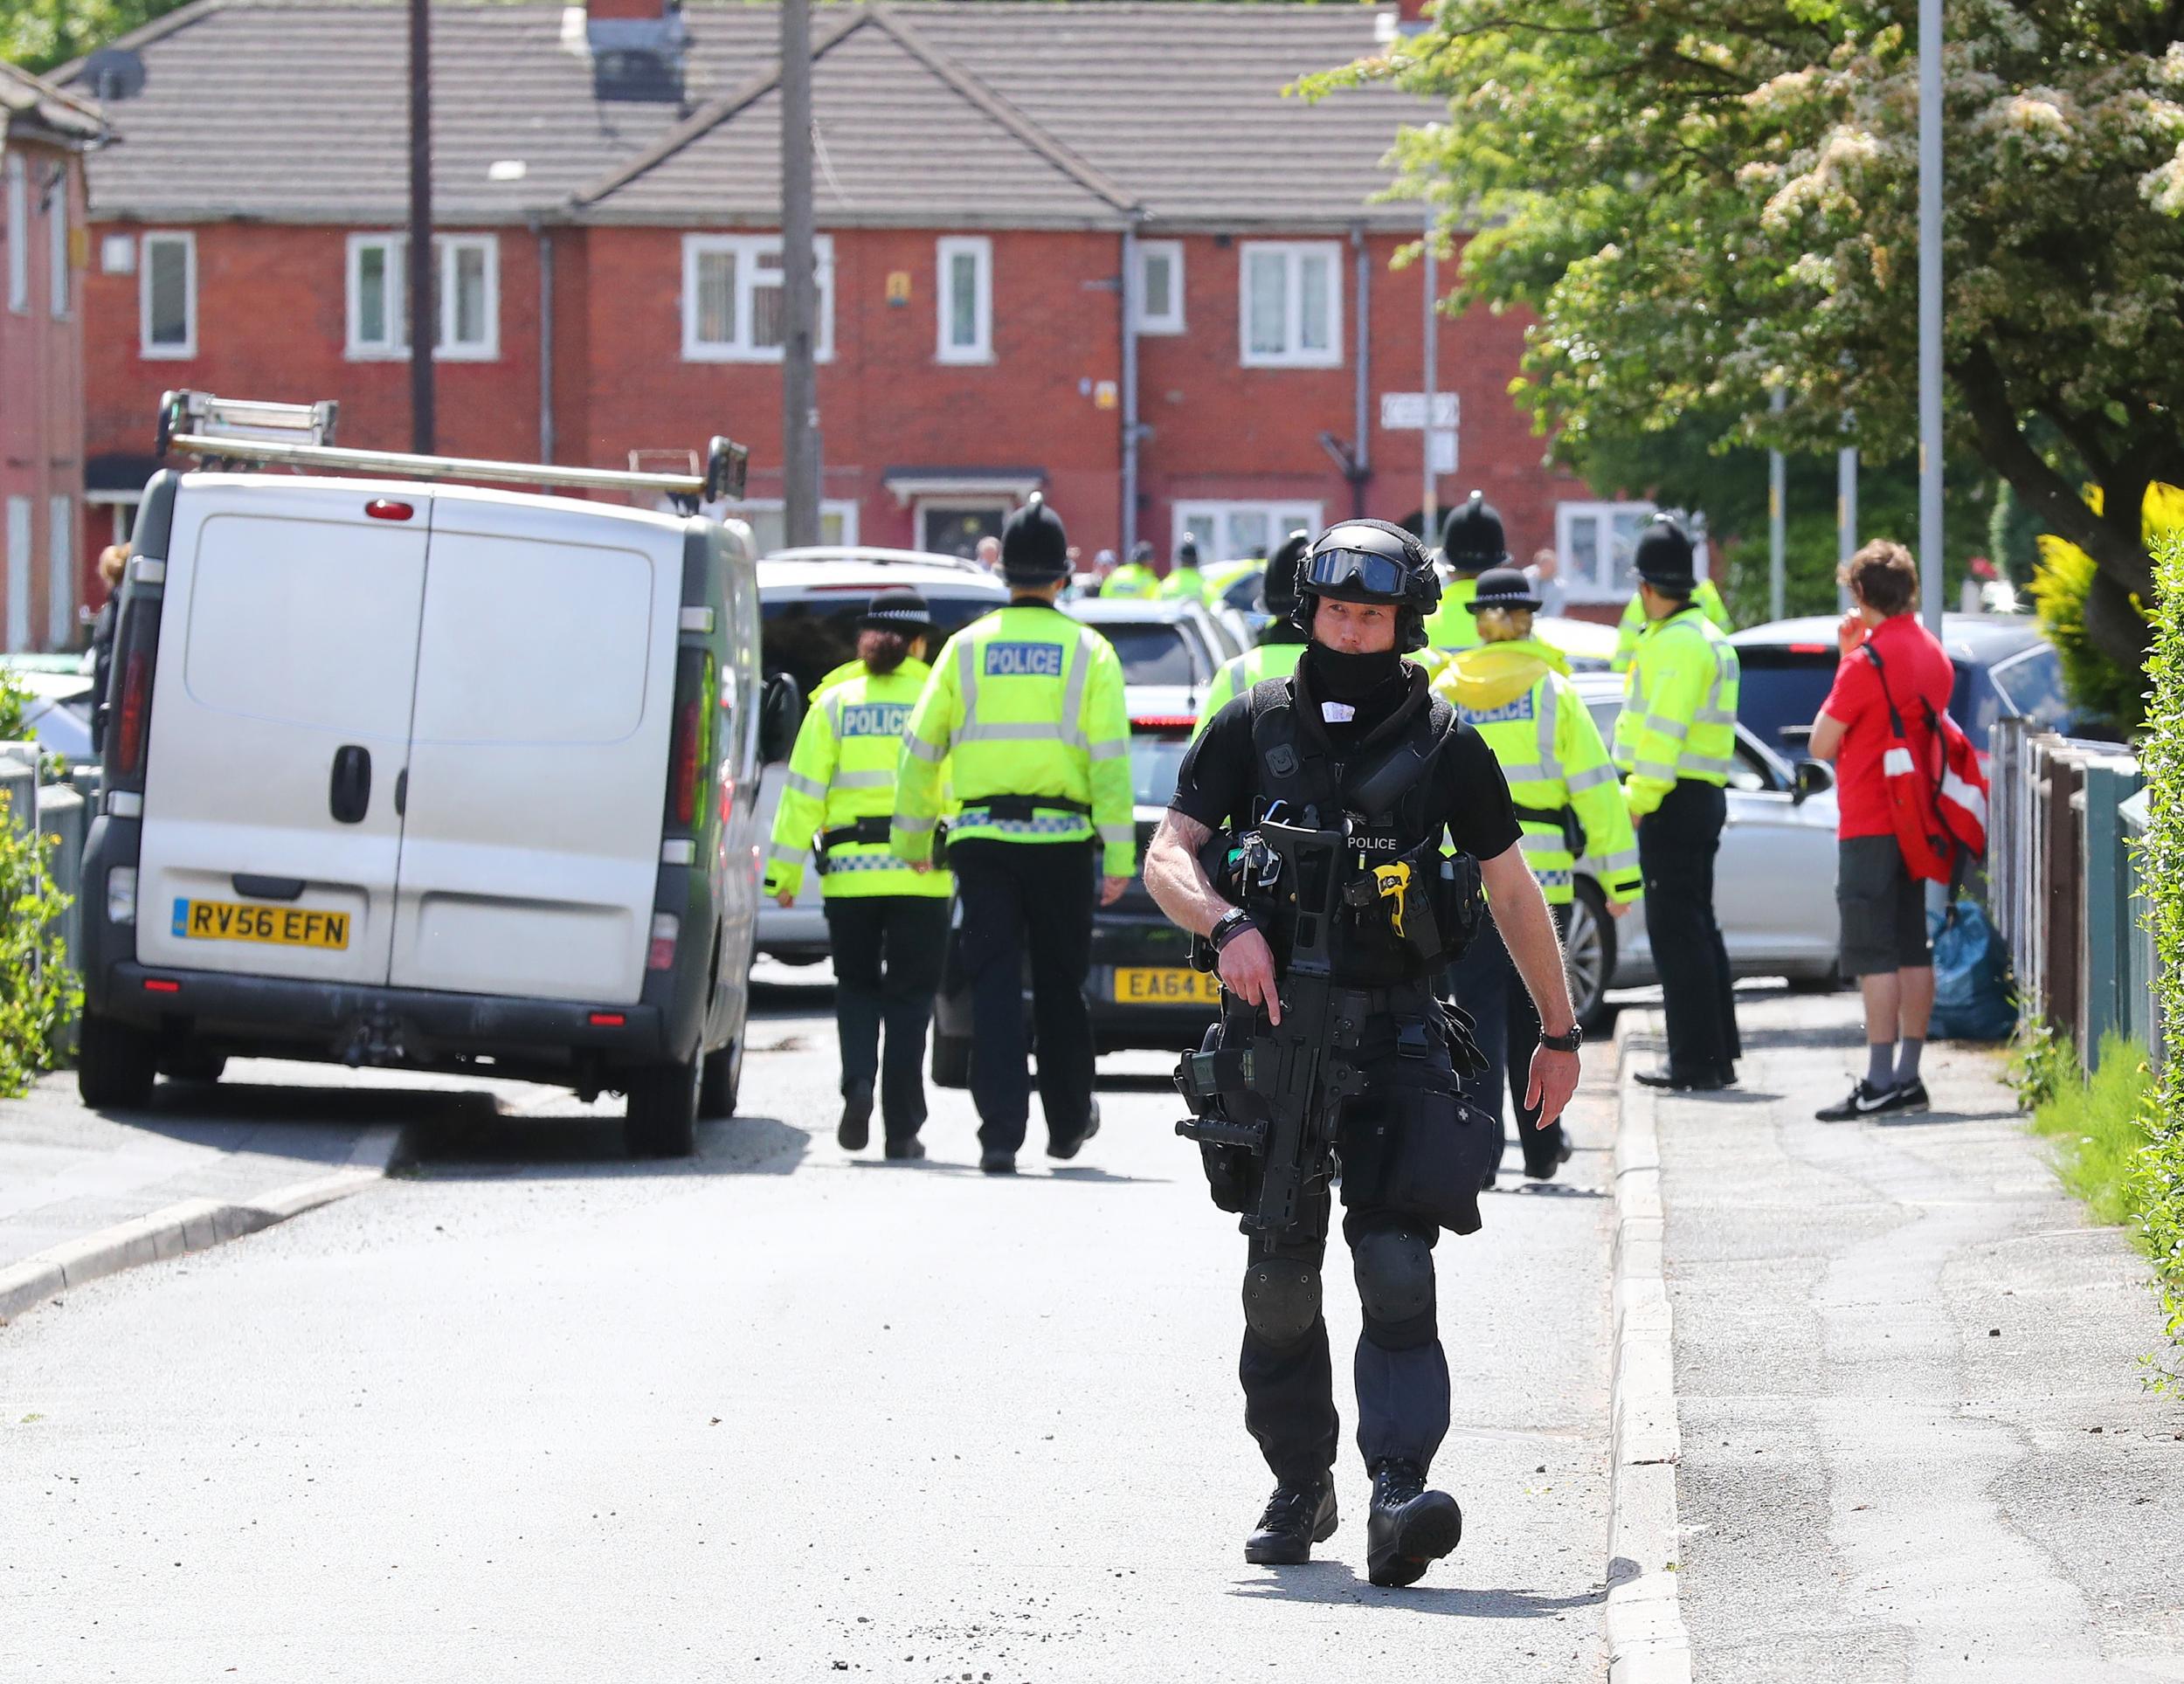 Police raid a house on Elsmore Rd in Fallowfield, where suspected suicide bomber Salman Abedi lived (Eamonn and James Clarke)